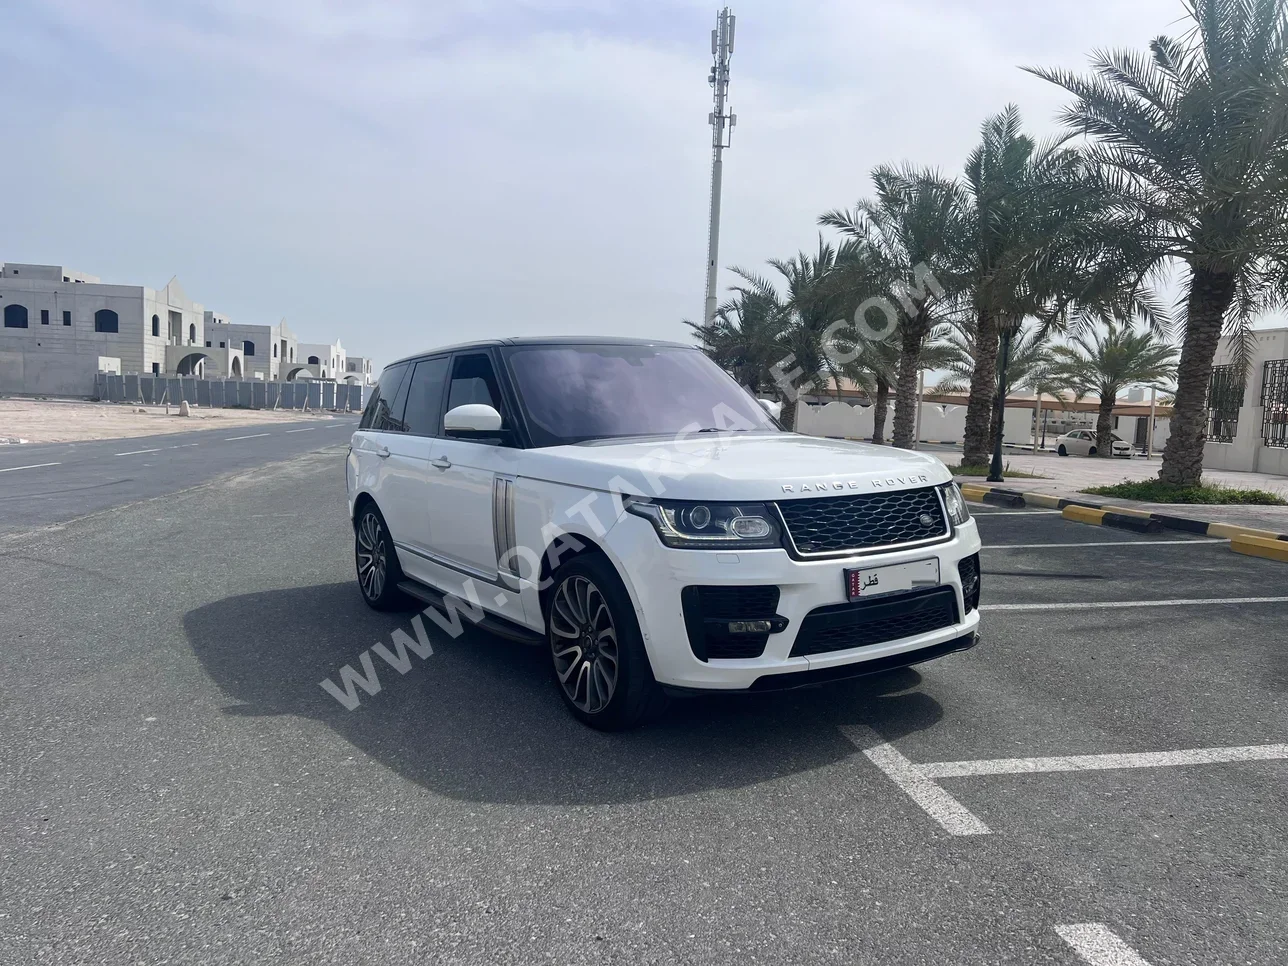 Land Rover  Range Rover  Vogue SE  2014  Automatic  160,000 Km  8 Cylinder  Four Wheel Drive (4WD)  SUV  White